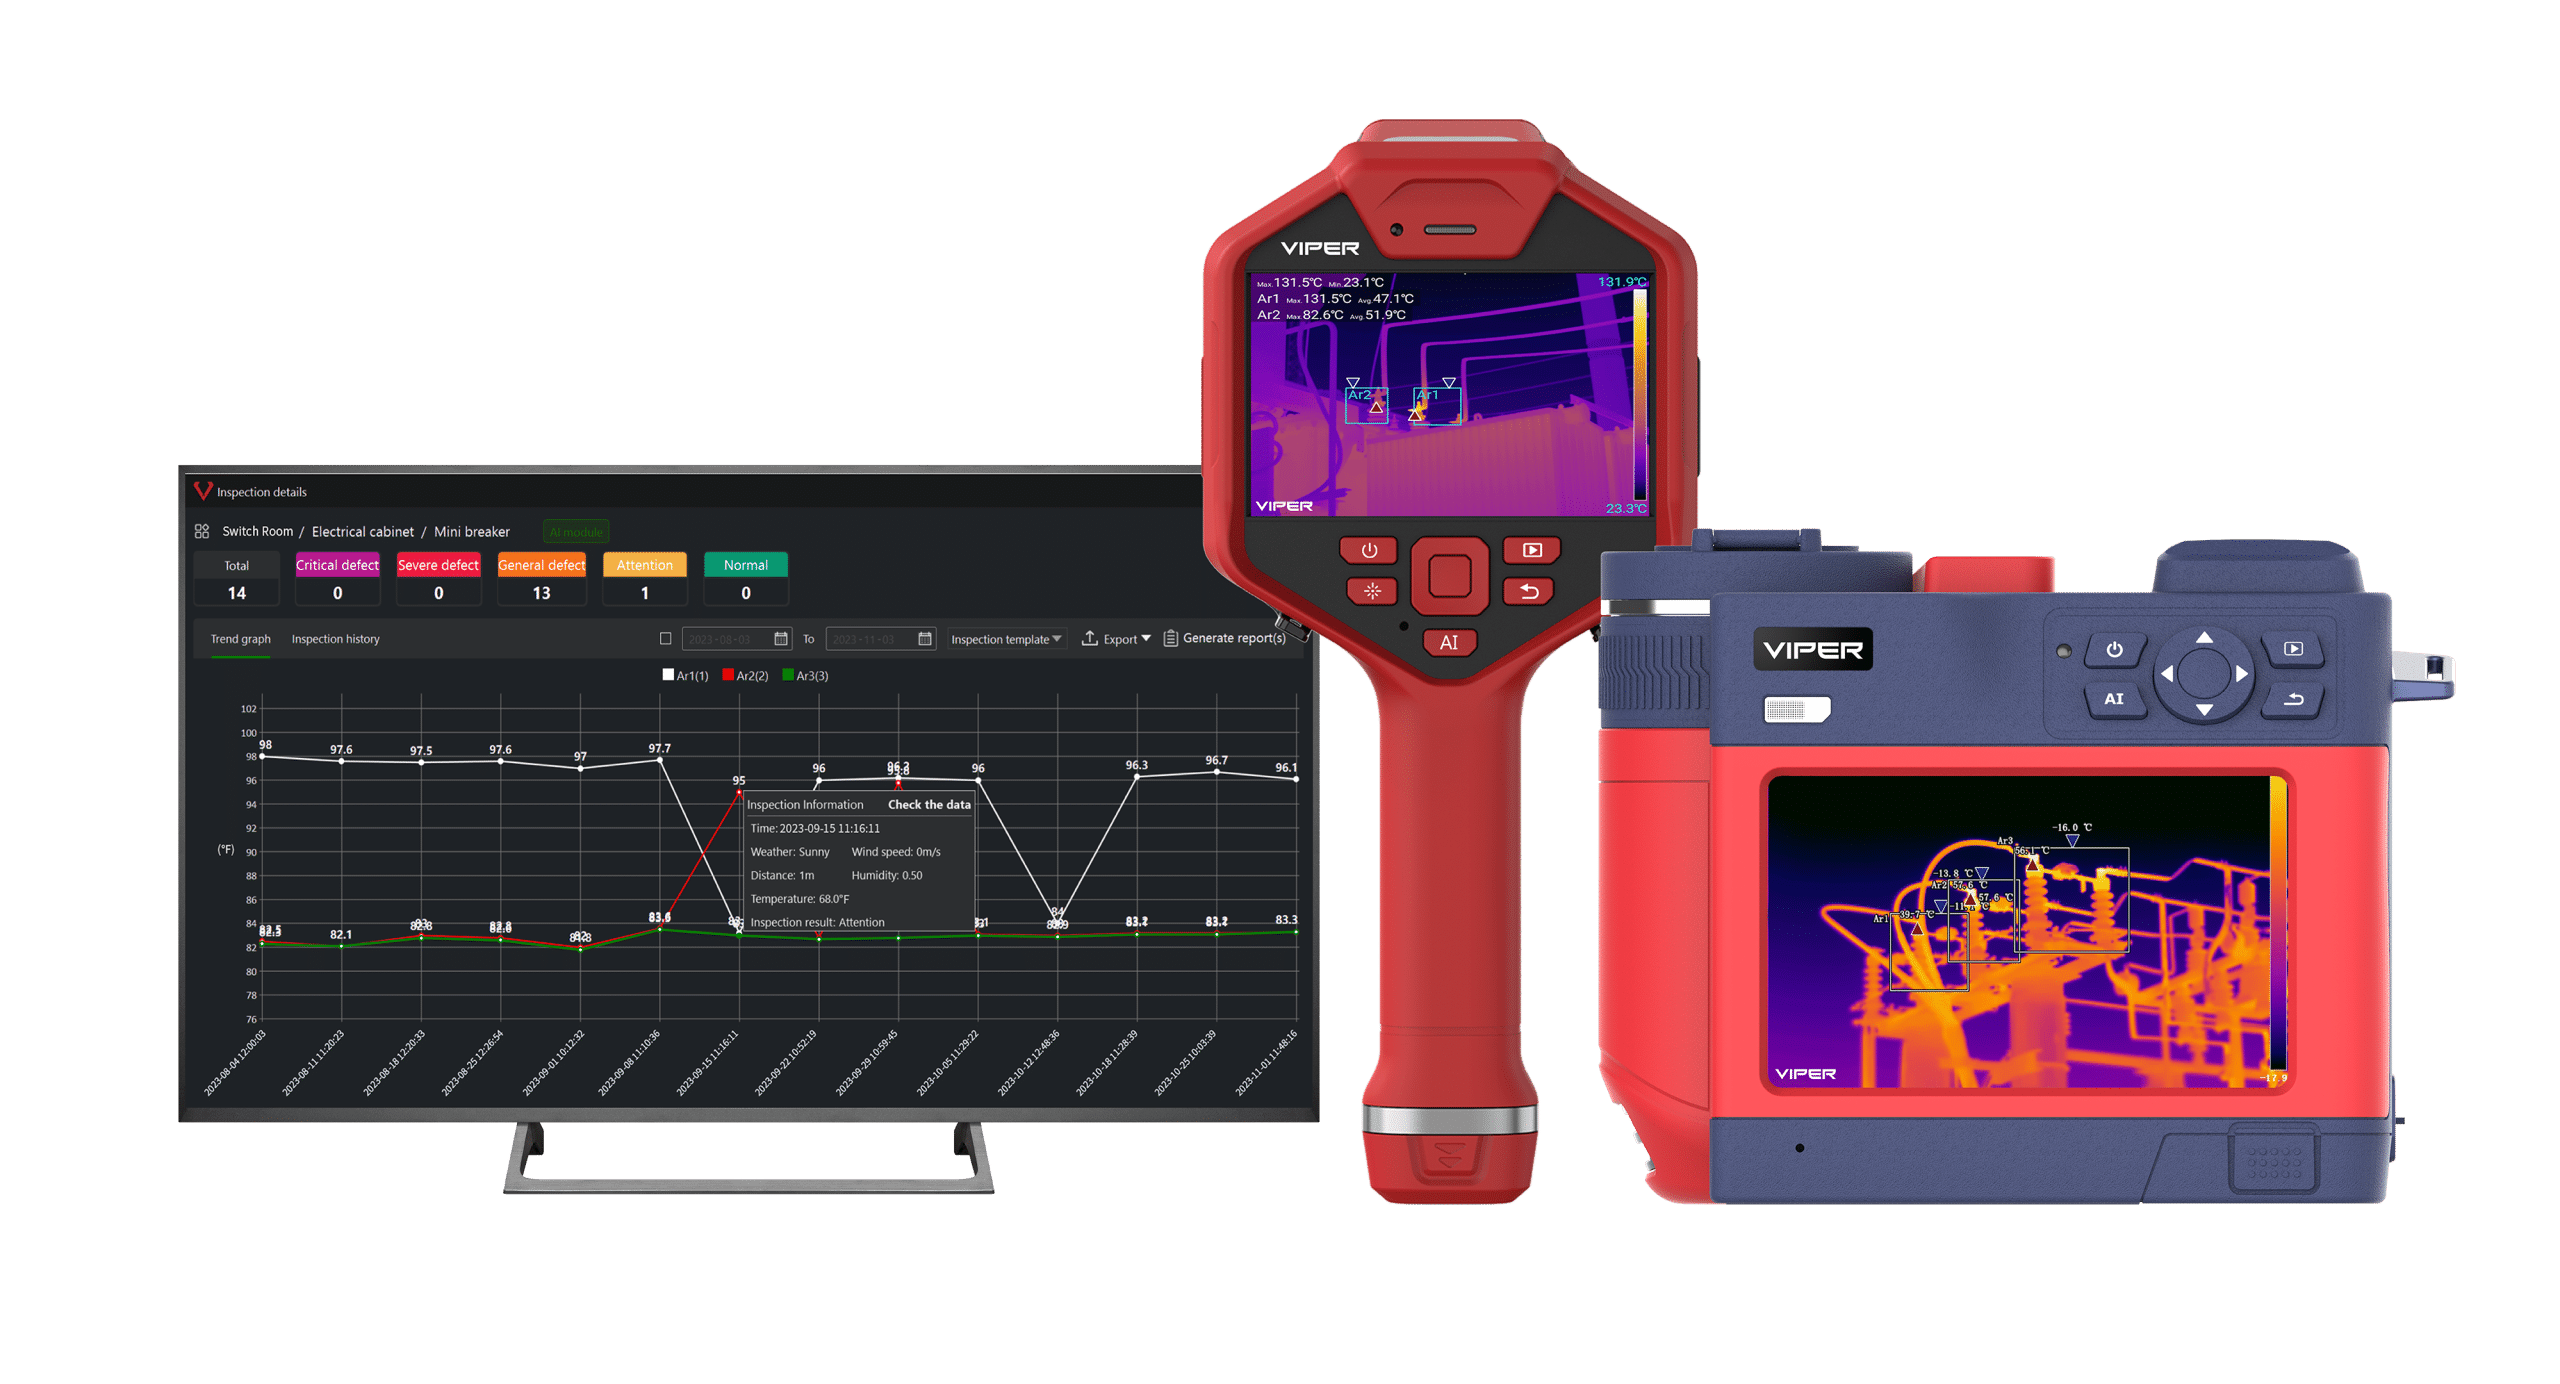 Route Assistant software - Viper portable thermal cameras